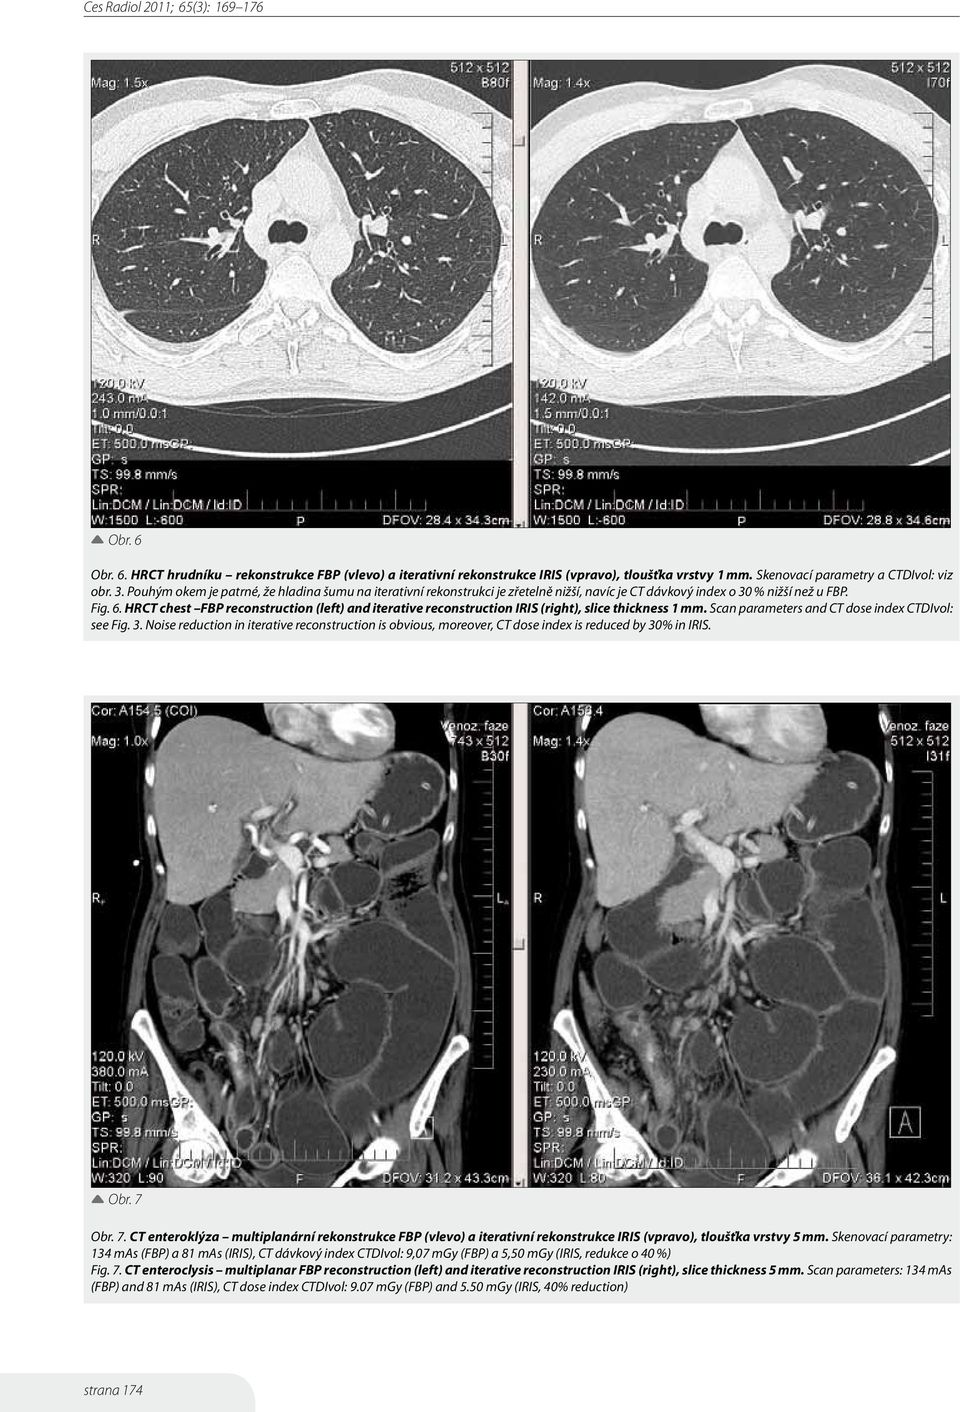 HRCT chest FBP reconstruction (left) and iterative reconstruction IRIS (right), slice thickness 1 mm. Scan parameters and CT dose index CTDIvol: see Fig. 3.